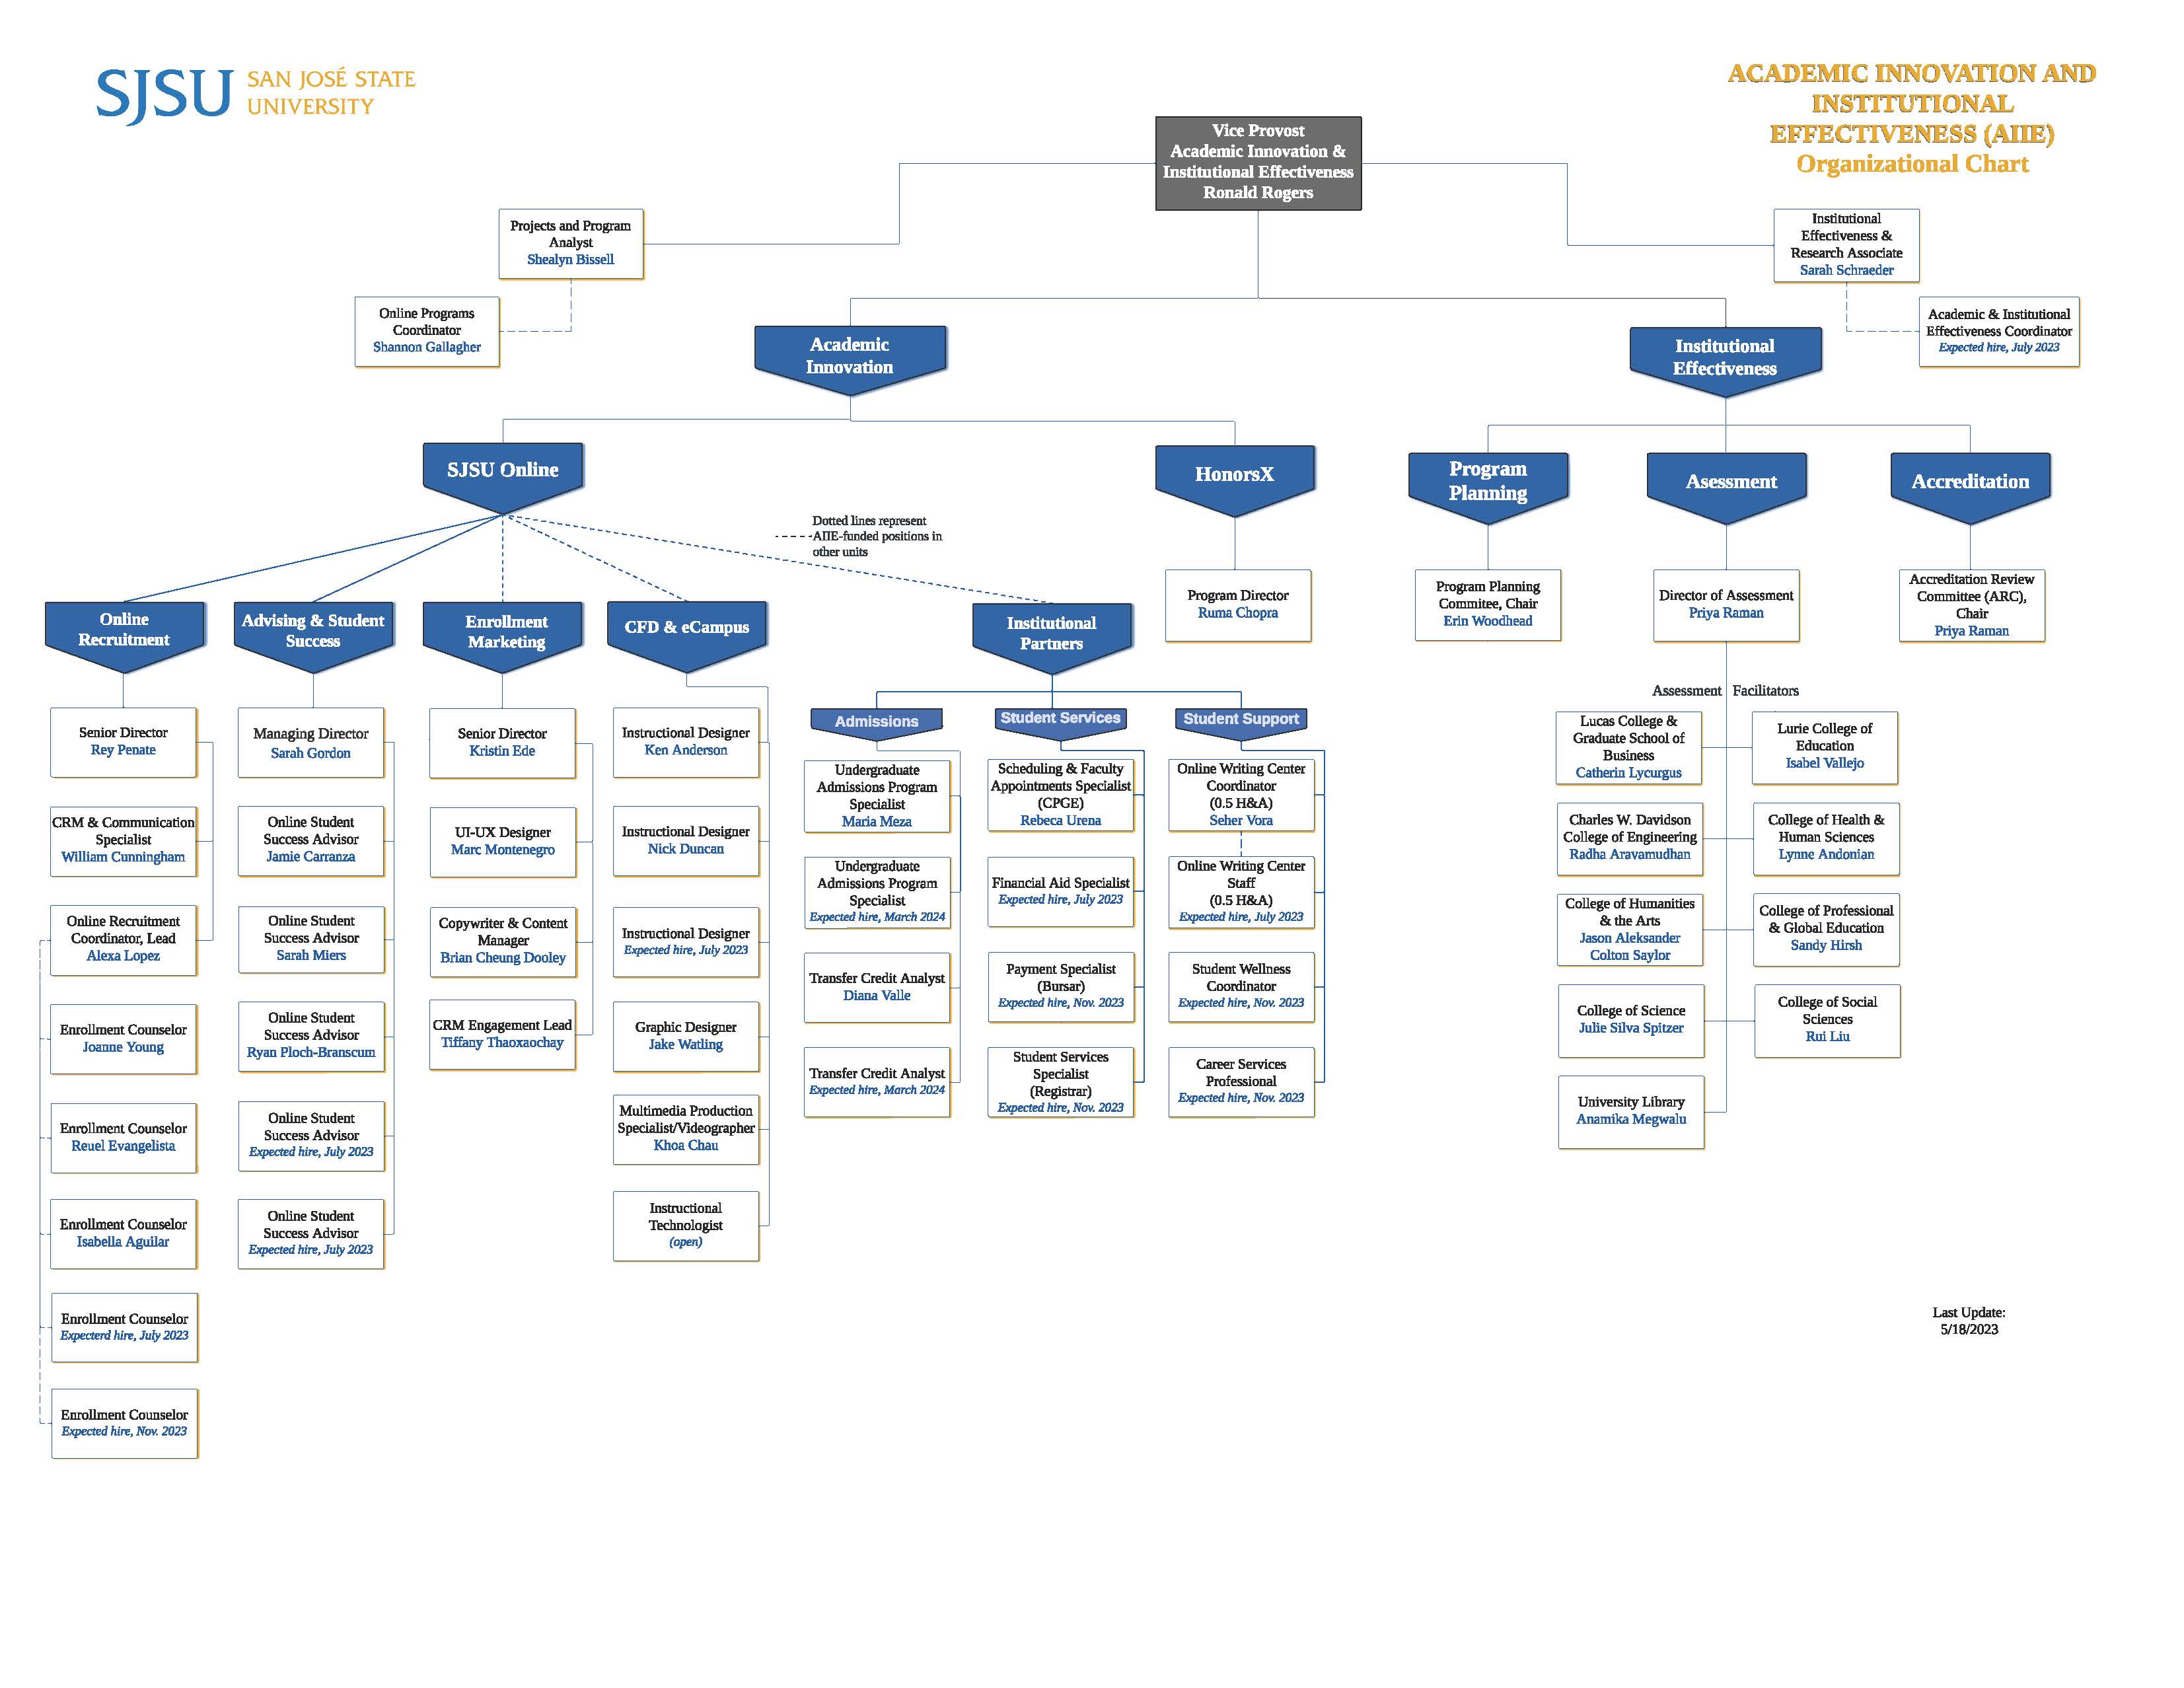 Academic Innovation and Institutional Effectiveness Organizational Chart